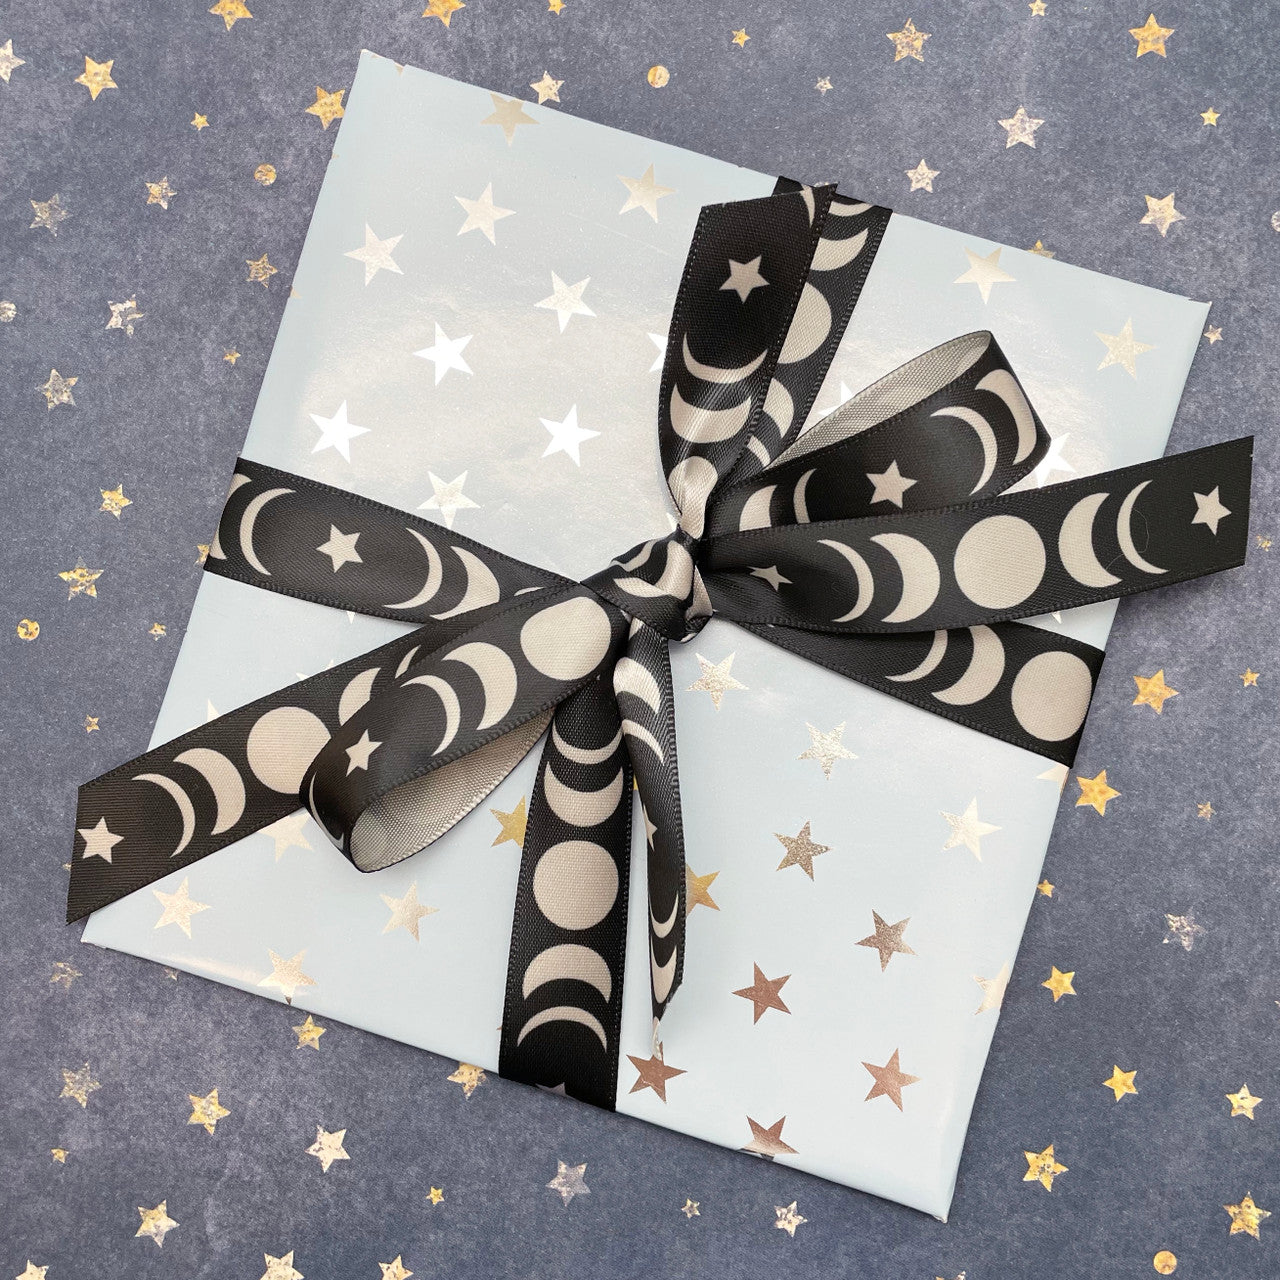 Moon phase ribbon tied on a starry background for a pretty gift for any celestial  themed celebration!